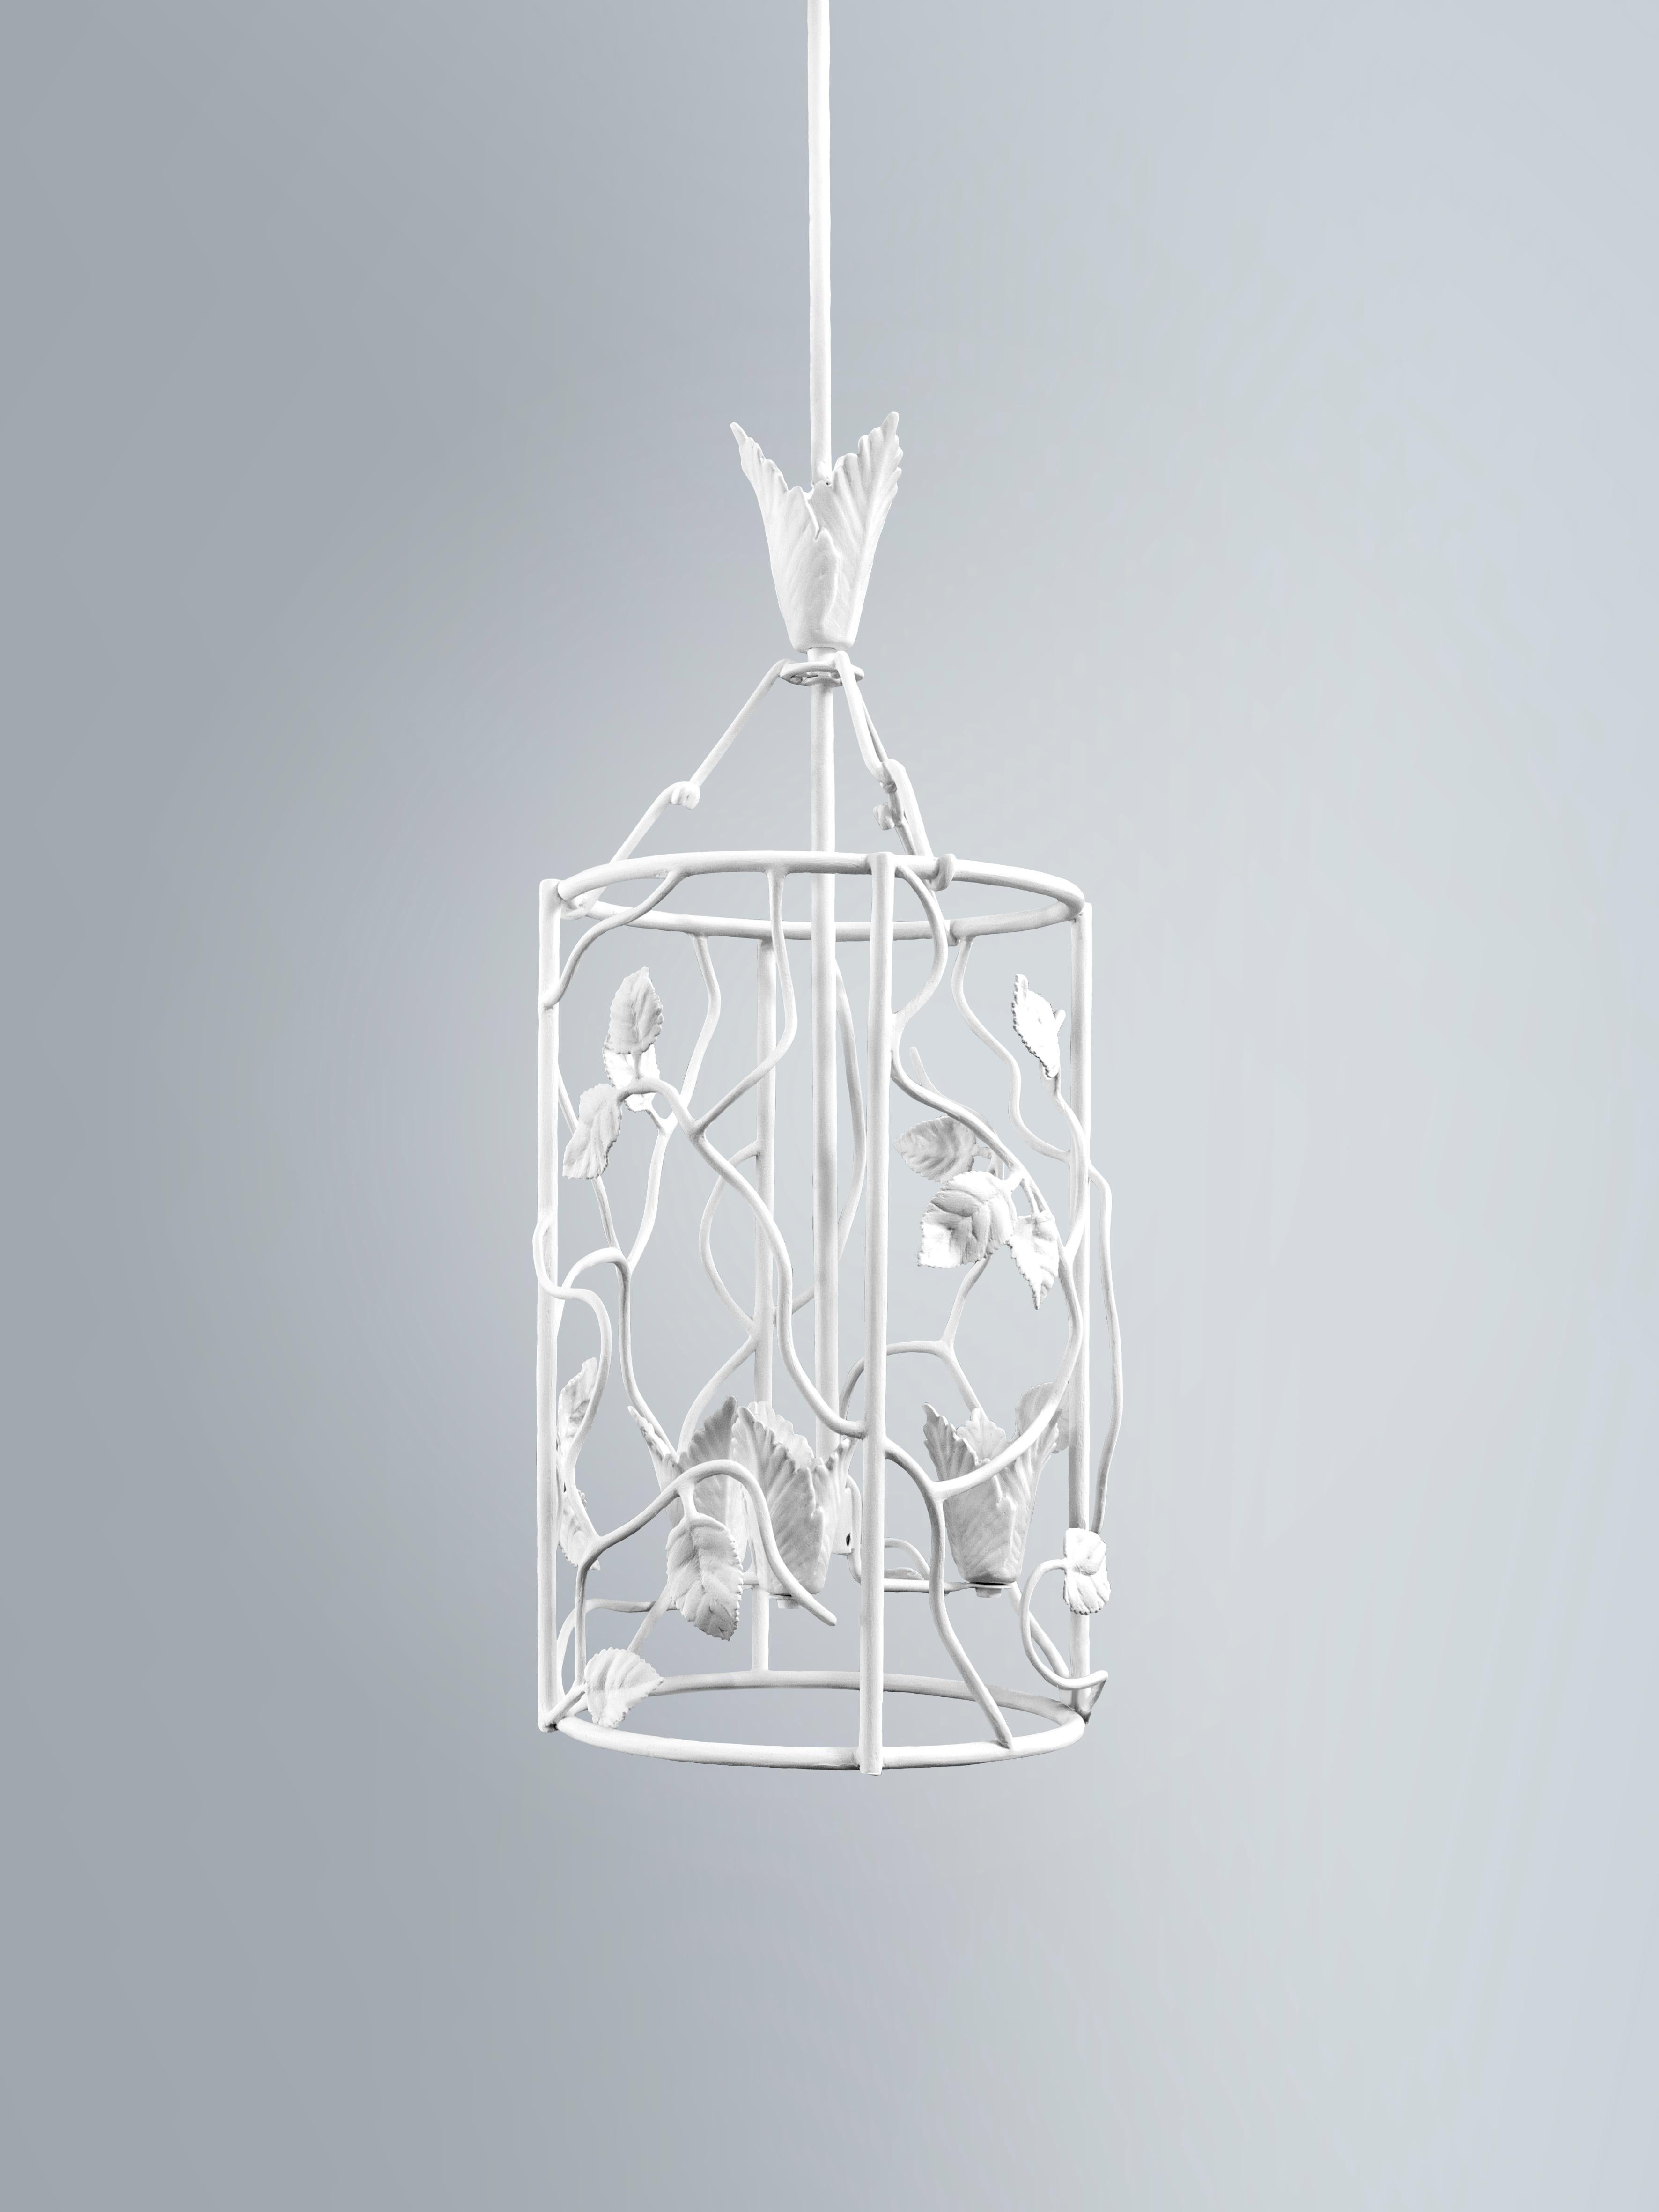 With rose leaves interspersed on a textured frame, this lantern resembles a piece of naturalistic sculpture. Uplighter with 3 bulbs. 
Please note these lantern are customisable- can be crafted in different sizes and finishes.There is a small and